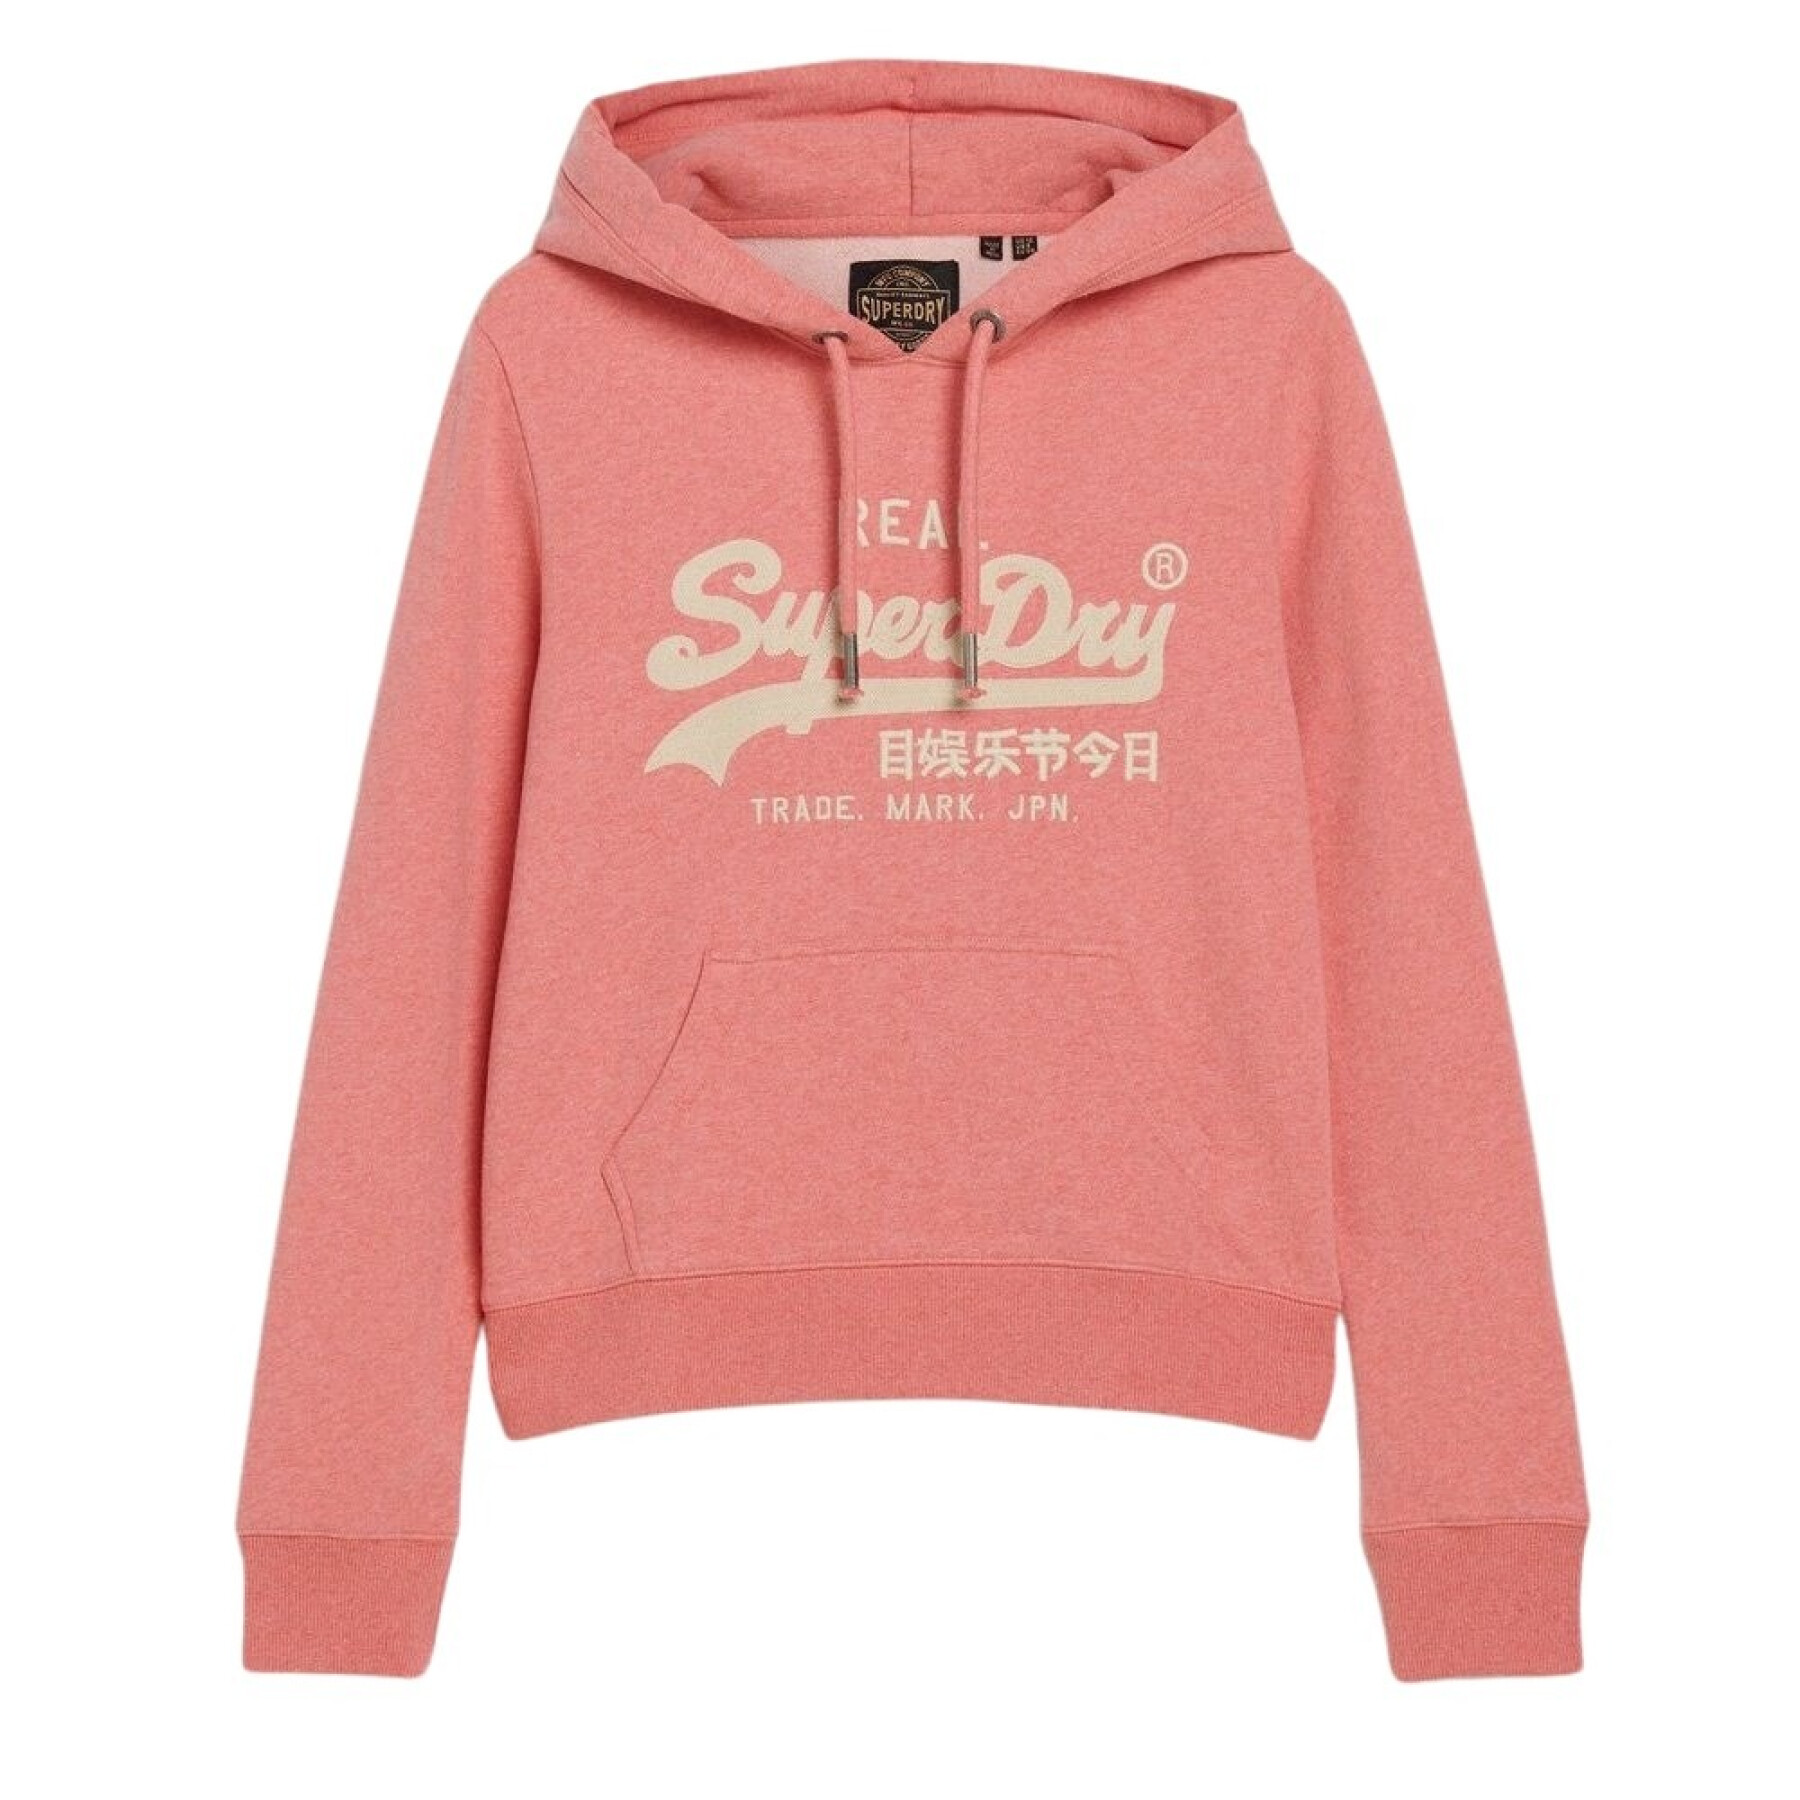 Women's hooded sweatshirt Superdry Embroidered Vl Graphic